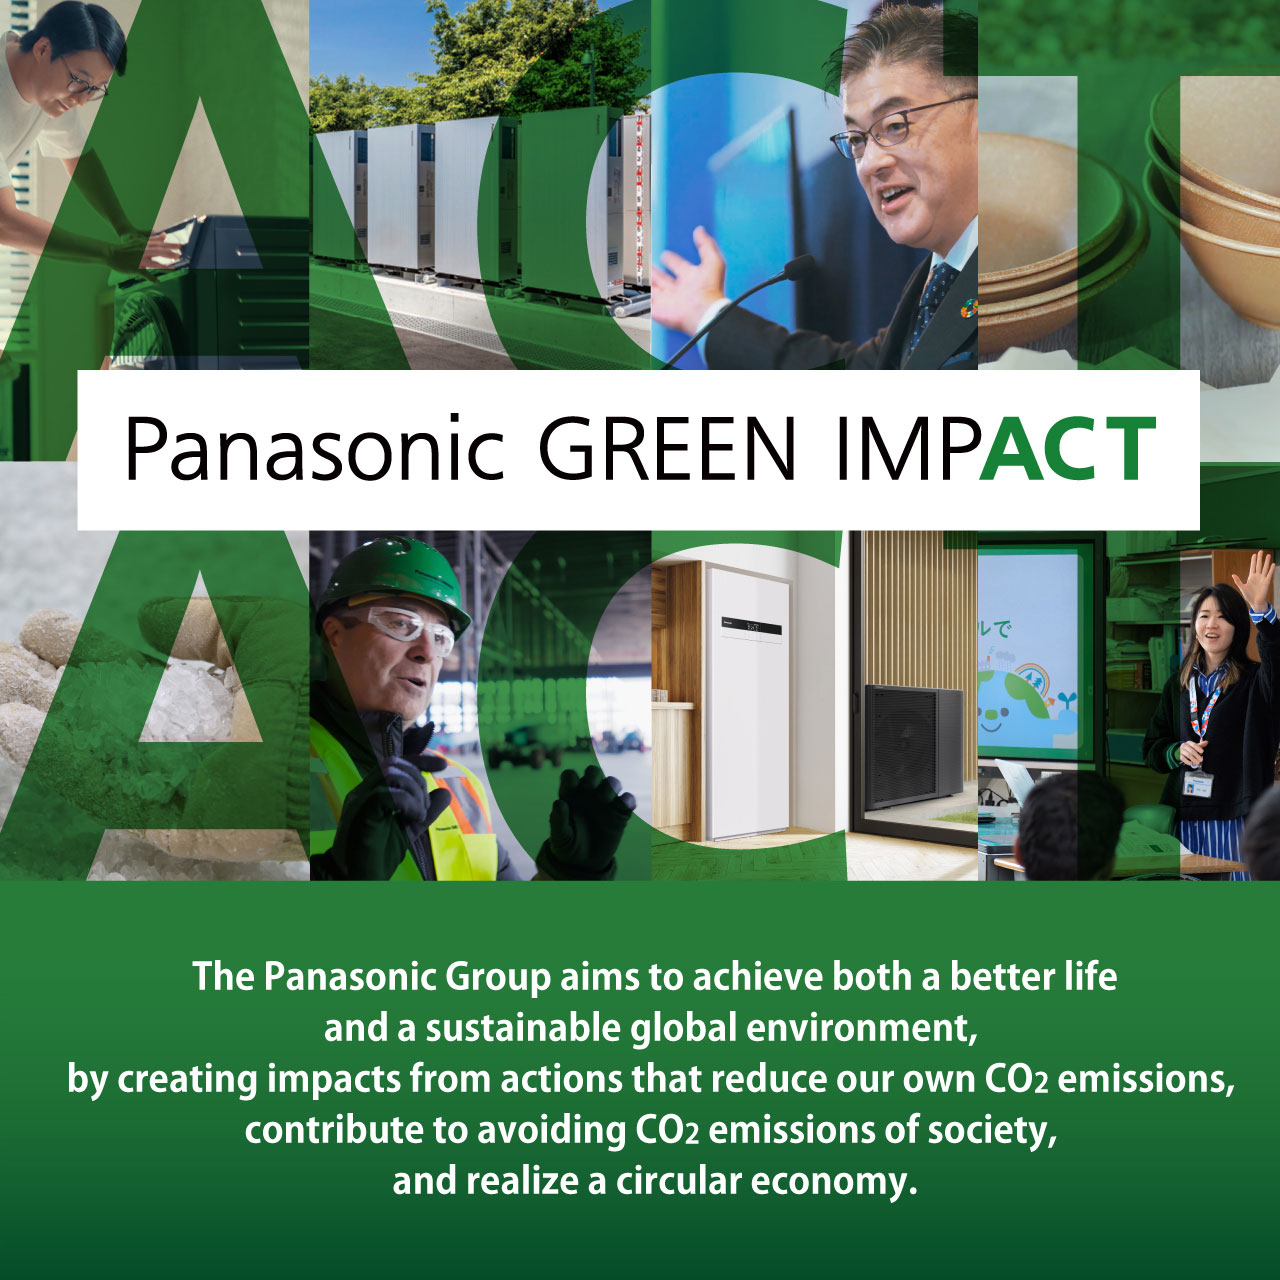 The Panasonic Group aims to achieve both a better life and a sustainable global environment, by creating impacts from actions that reduce our own CO2 emissions, contribute to avoiding CO2 emissions of society, and realize a circular economy.